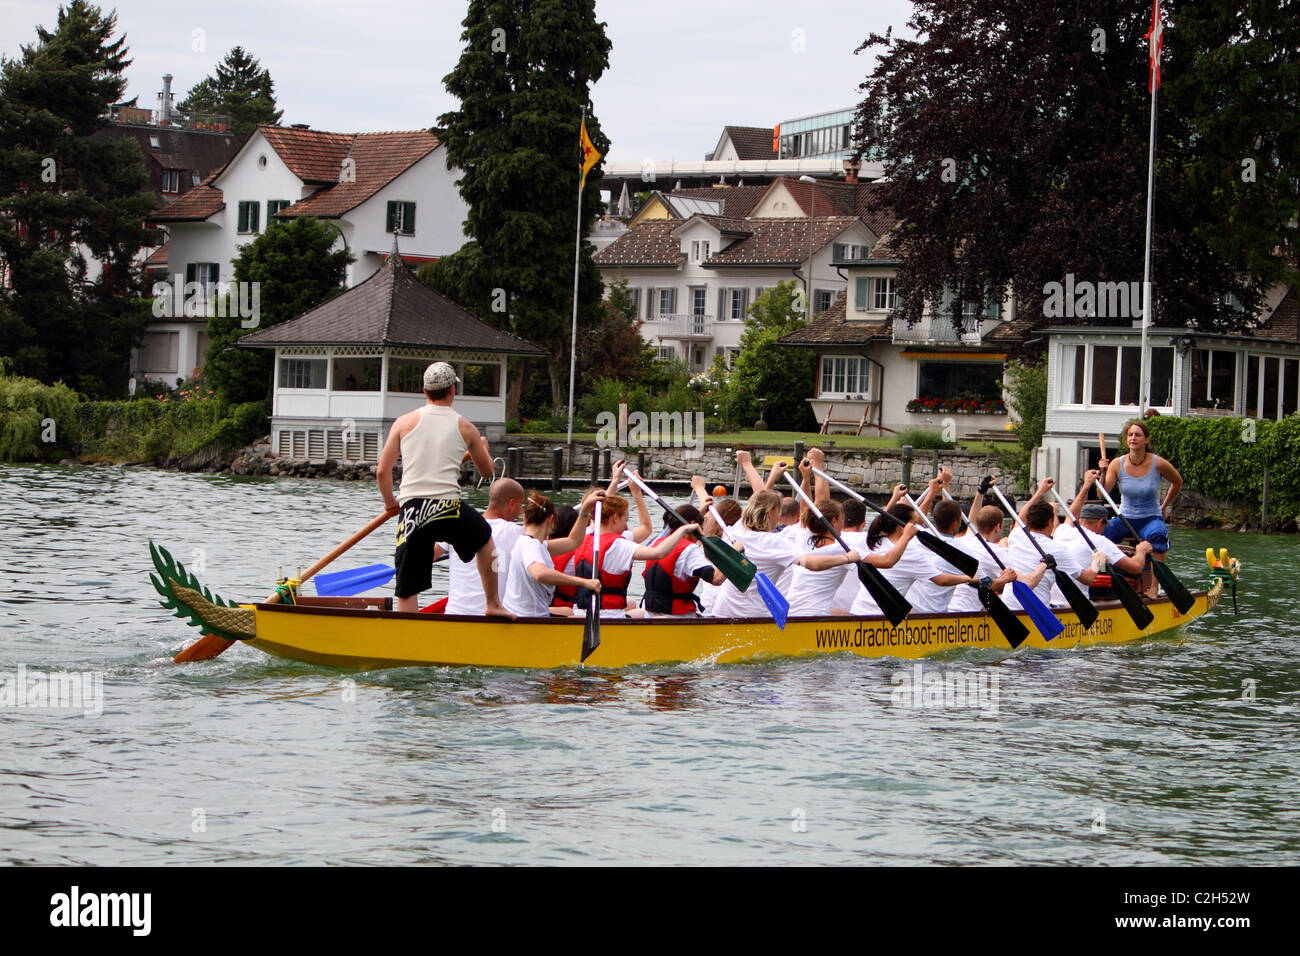 Athletes fought hard for victory and had fun at the dragen boat racing festival June 12, 2010 in Meilen, Switzerland. Stock Photo